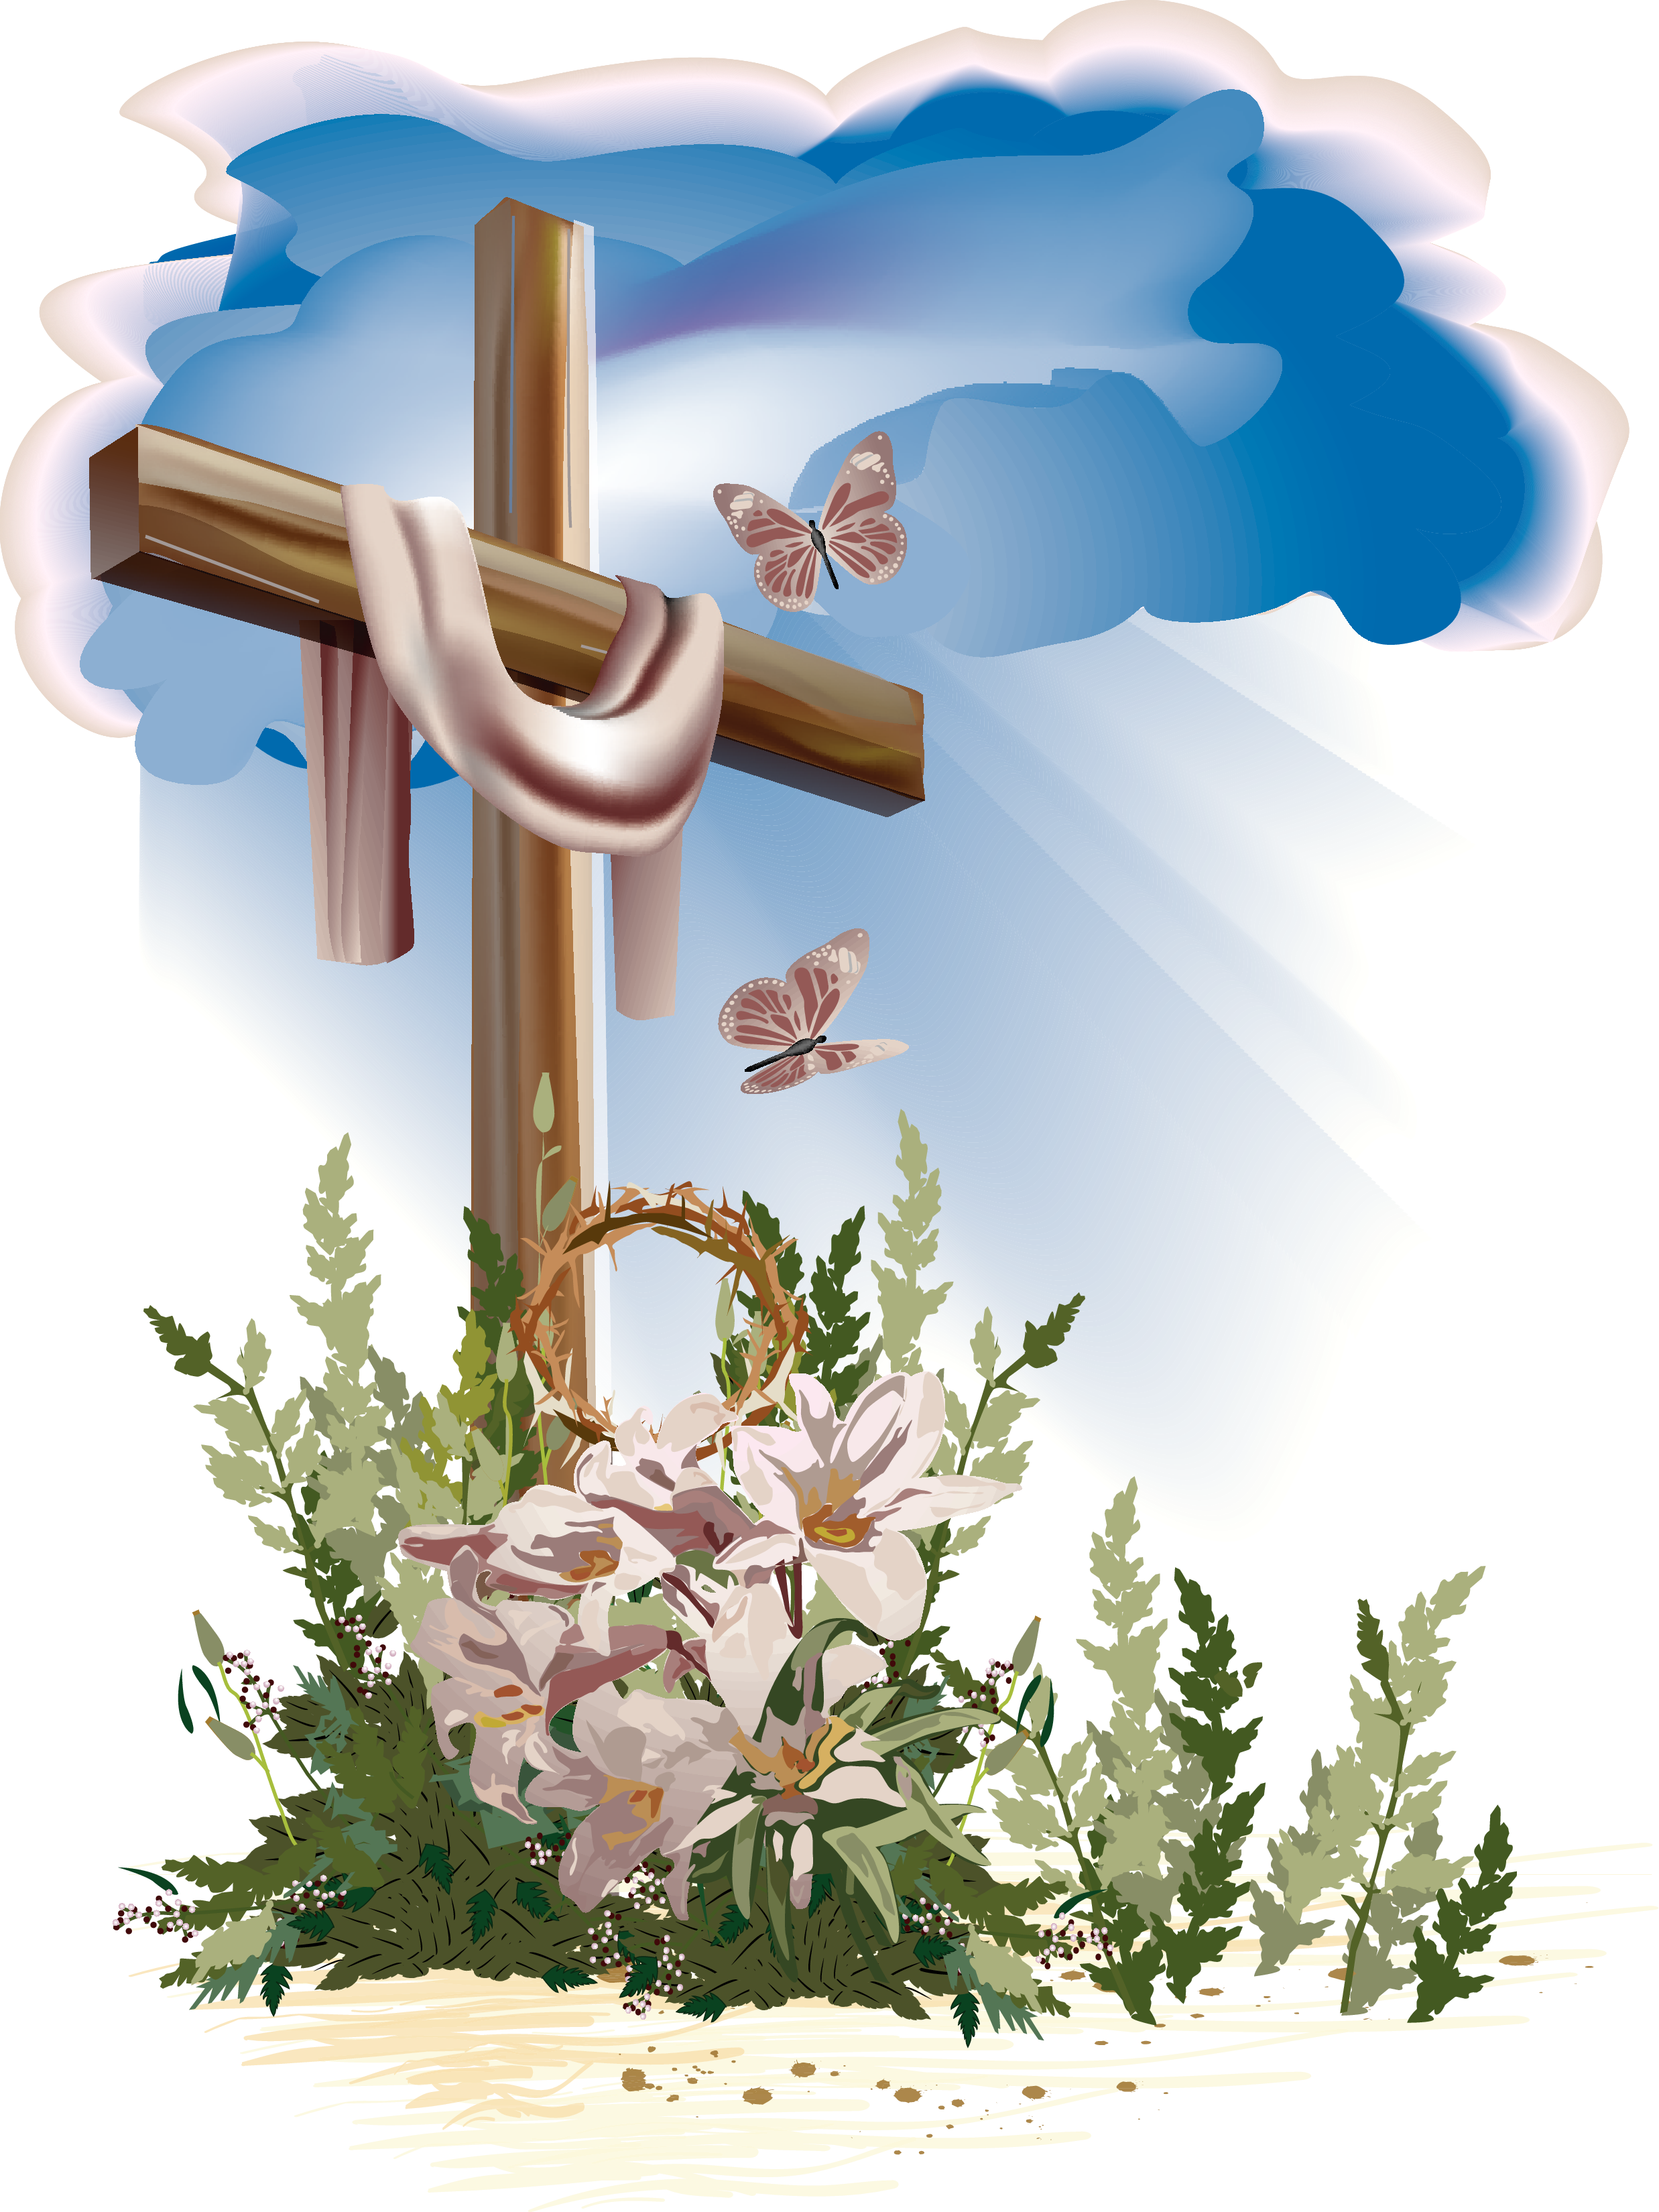 Christian Easter Hd PNG Image